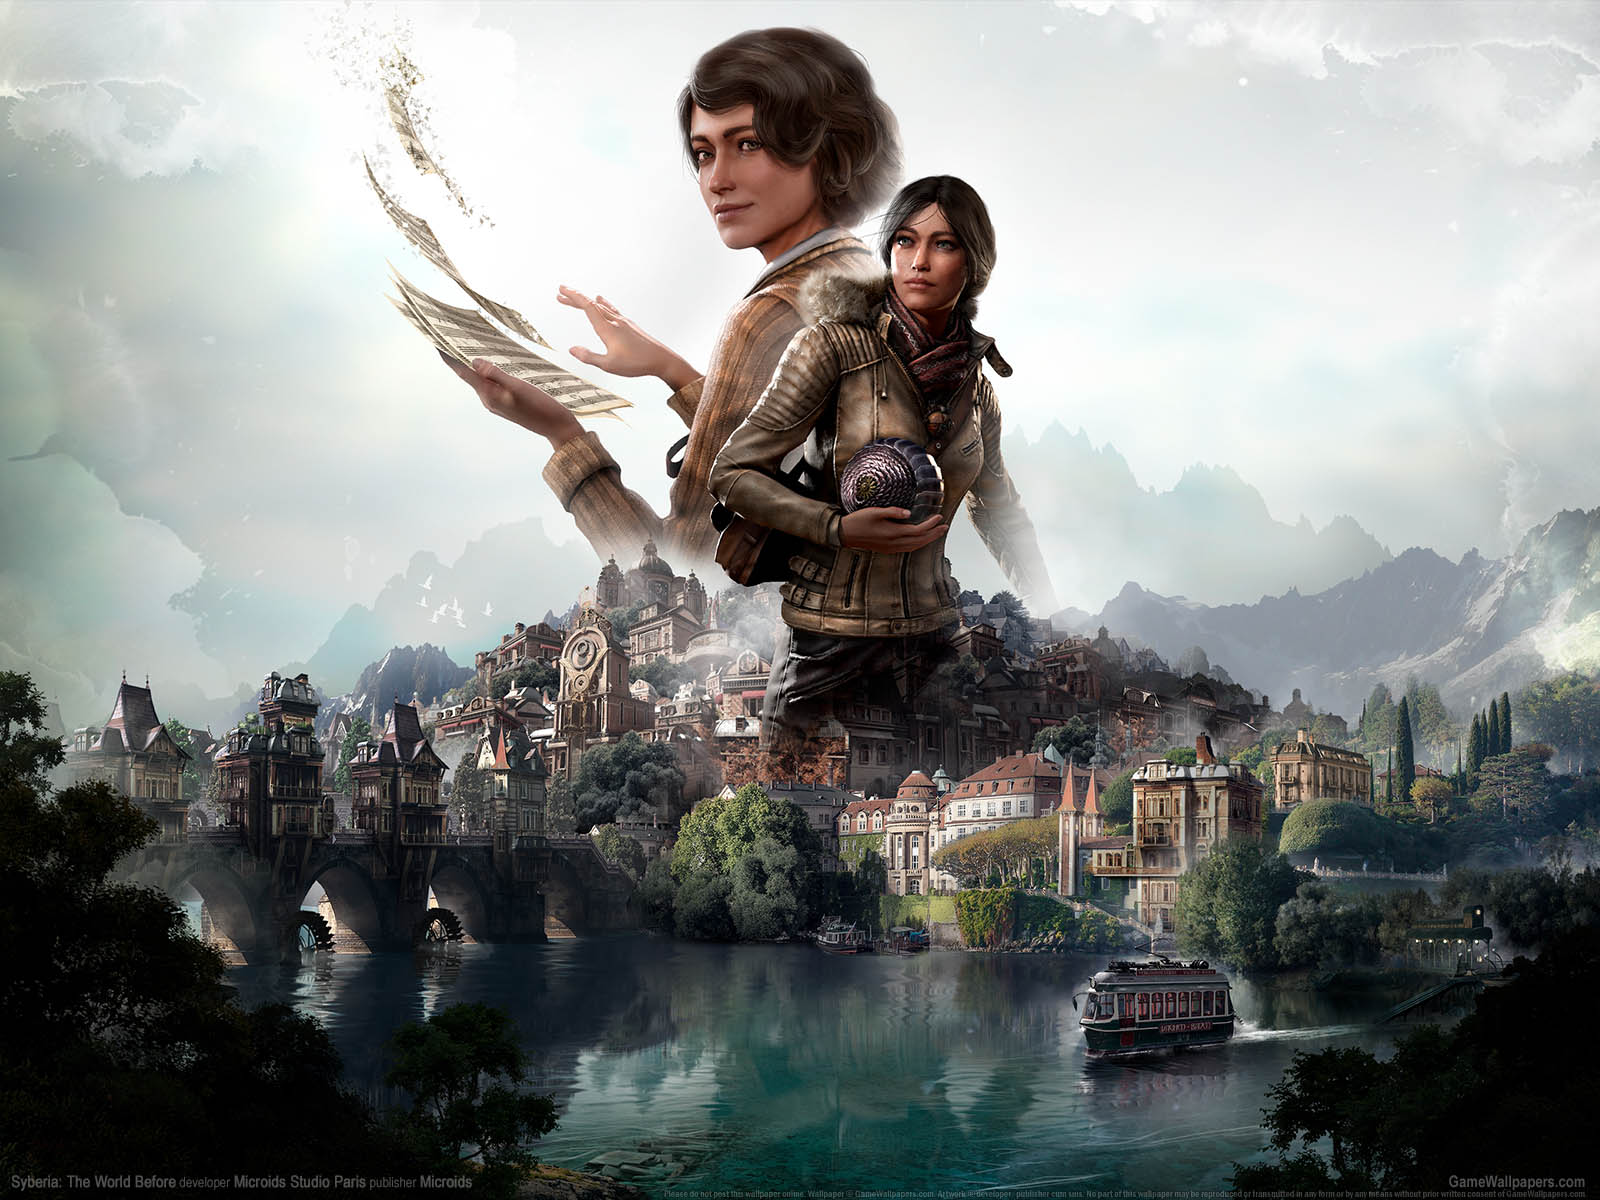 Syberia%3A The World Before achtergrond 01 1600x1200